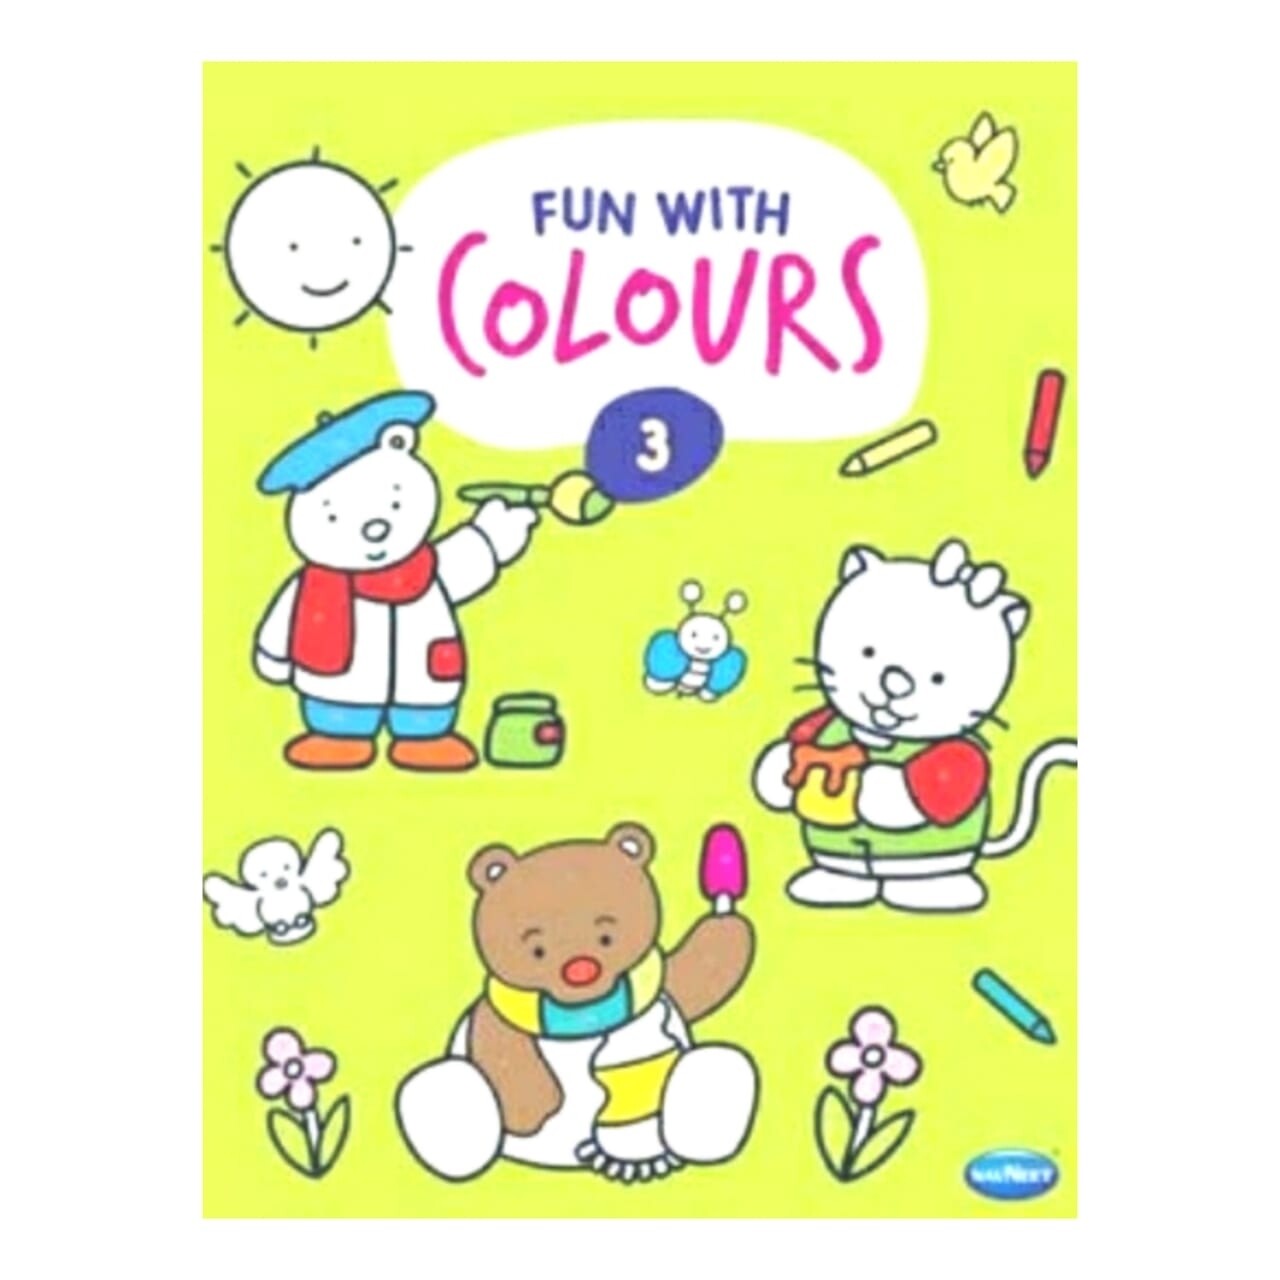 Fun With Colours - Set Of 2 Books